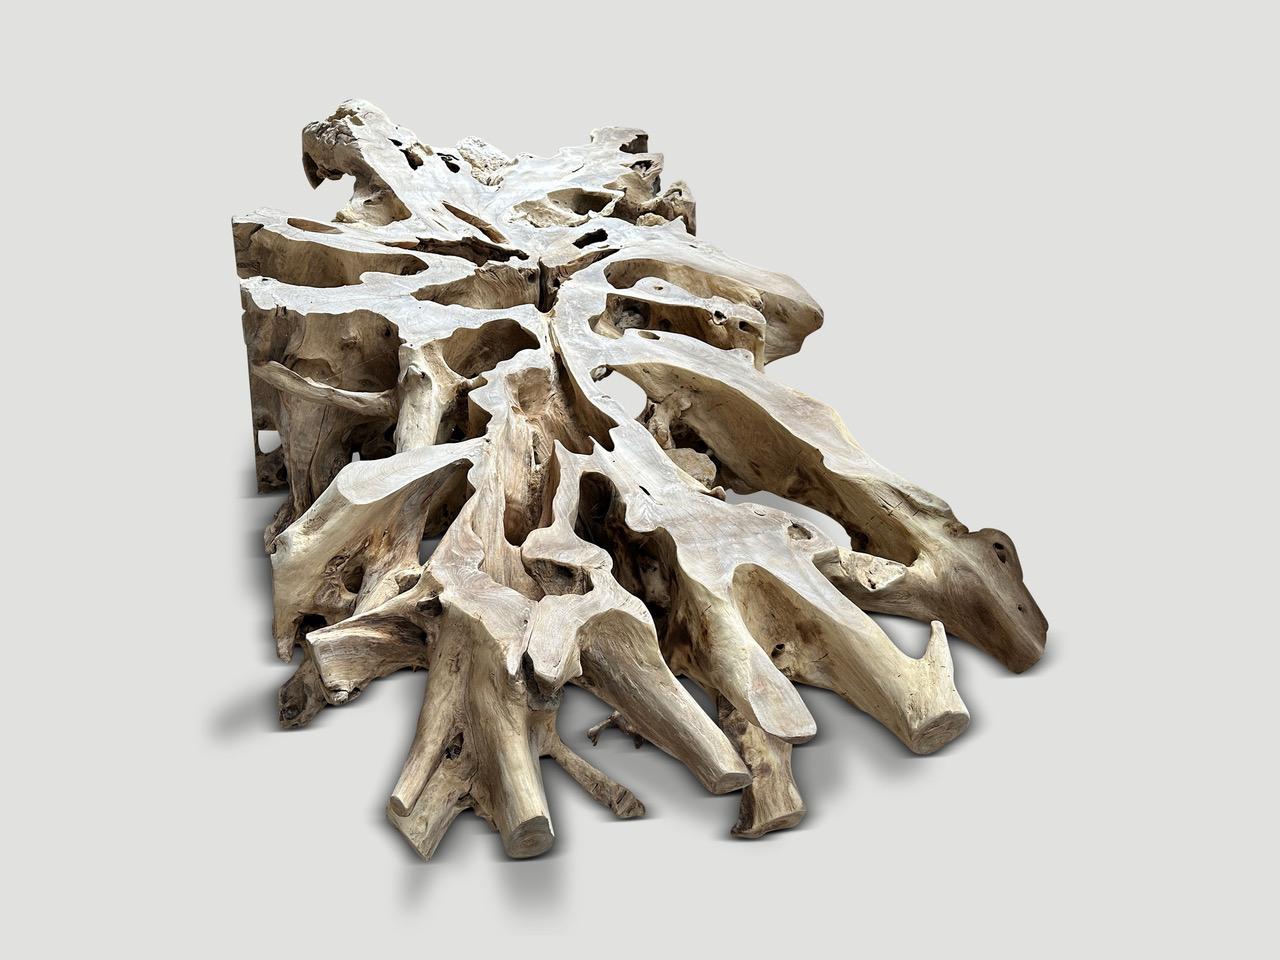 An impressive 100 year old teak root, with a rare rock formation. This natural process occurs as the teak root attaches itself to the rocks below. The root grows together organically with rocks thus forming a unique structure . We enhance the beauty